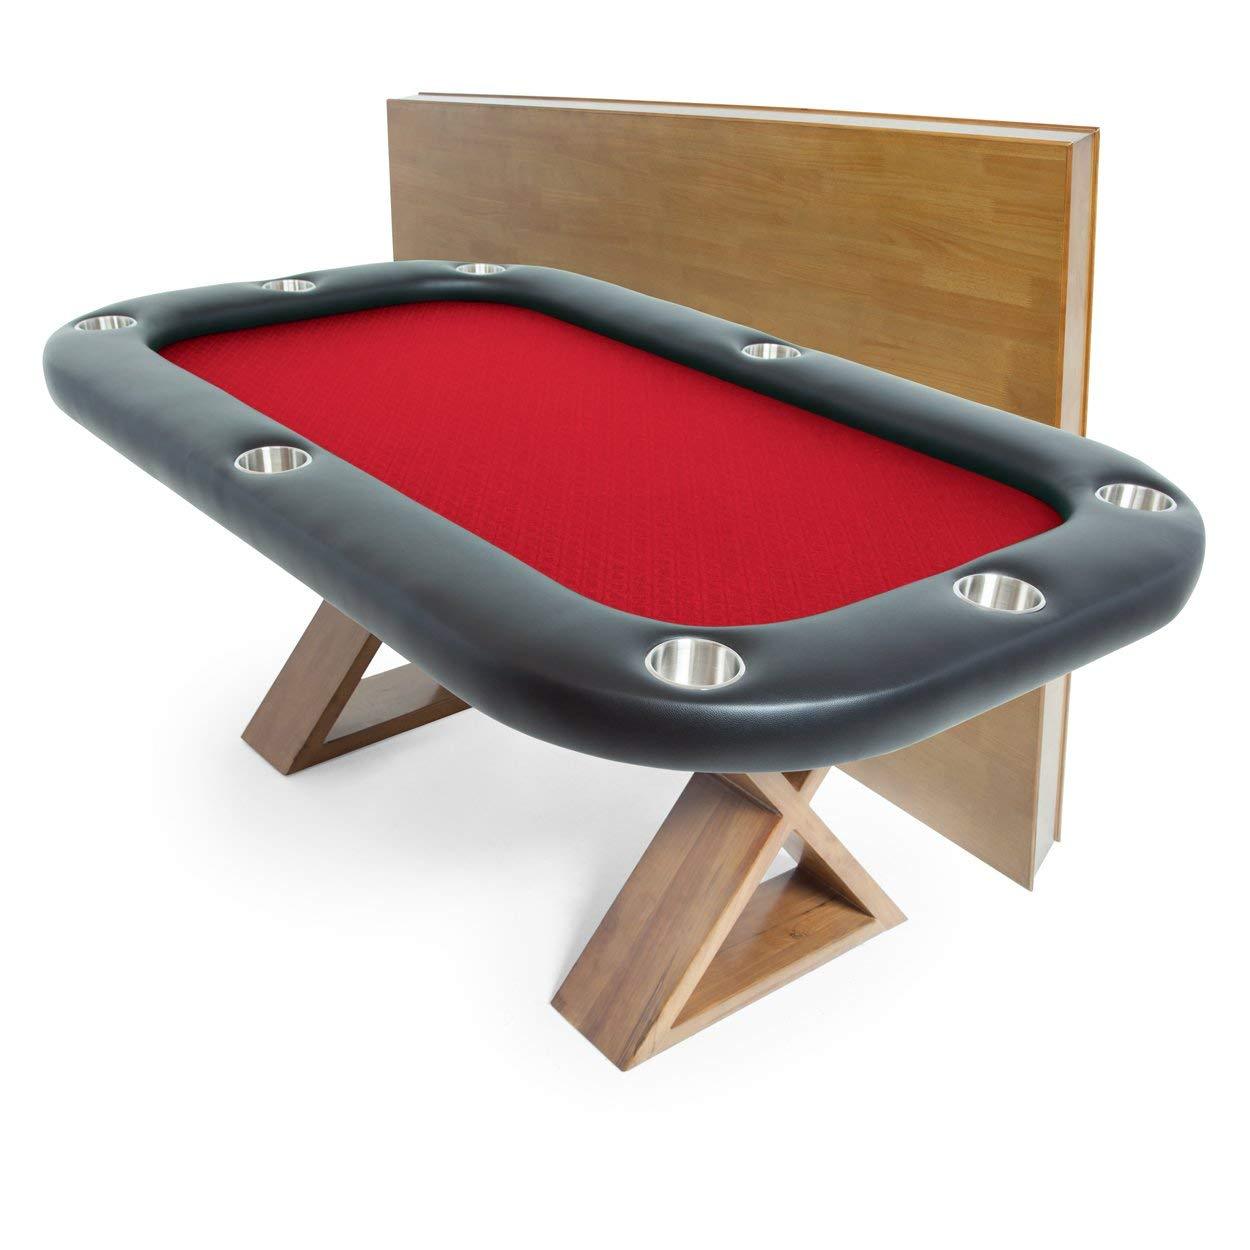 BBO Poker Tables BBO Poker Tables Helmsley Poker Dining Table 8 Person Poker & Game Tables Red / Speed Cloth 2BBO-HELM-RED-SS